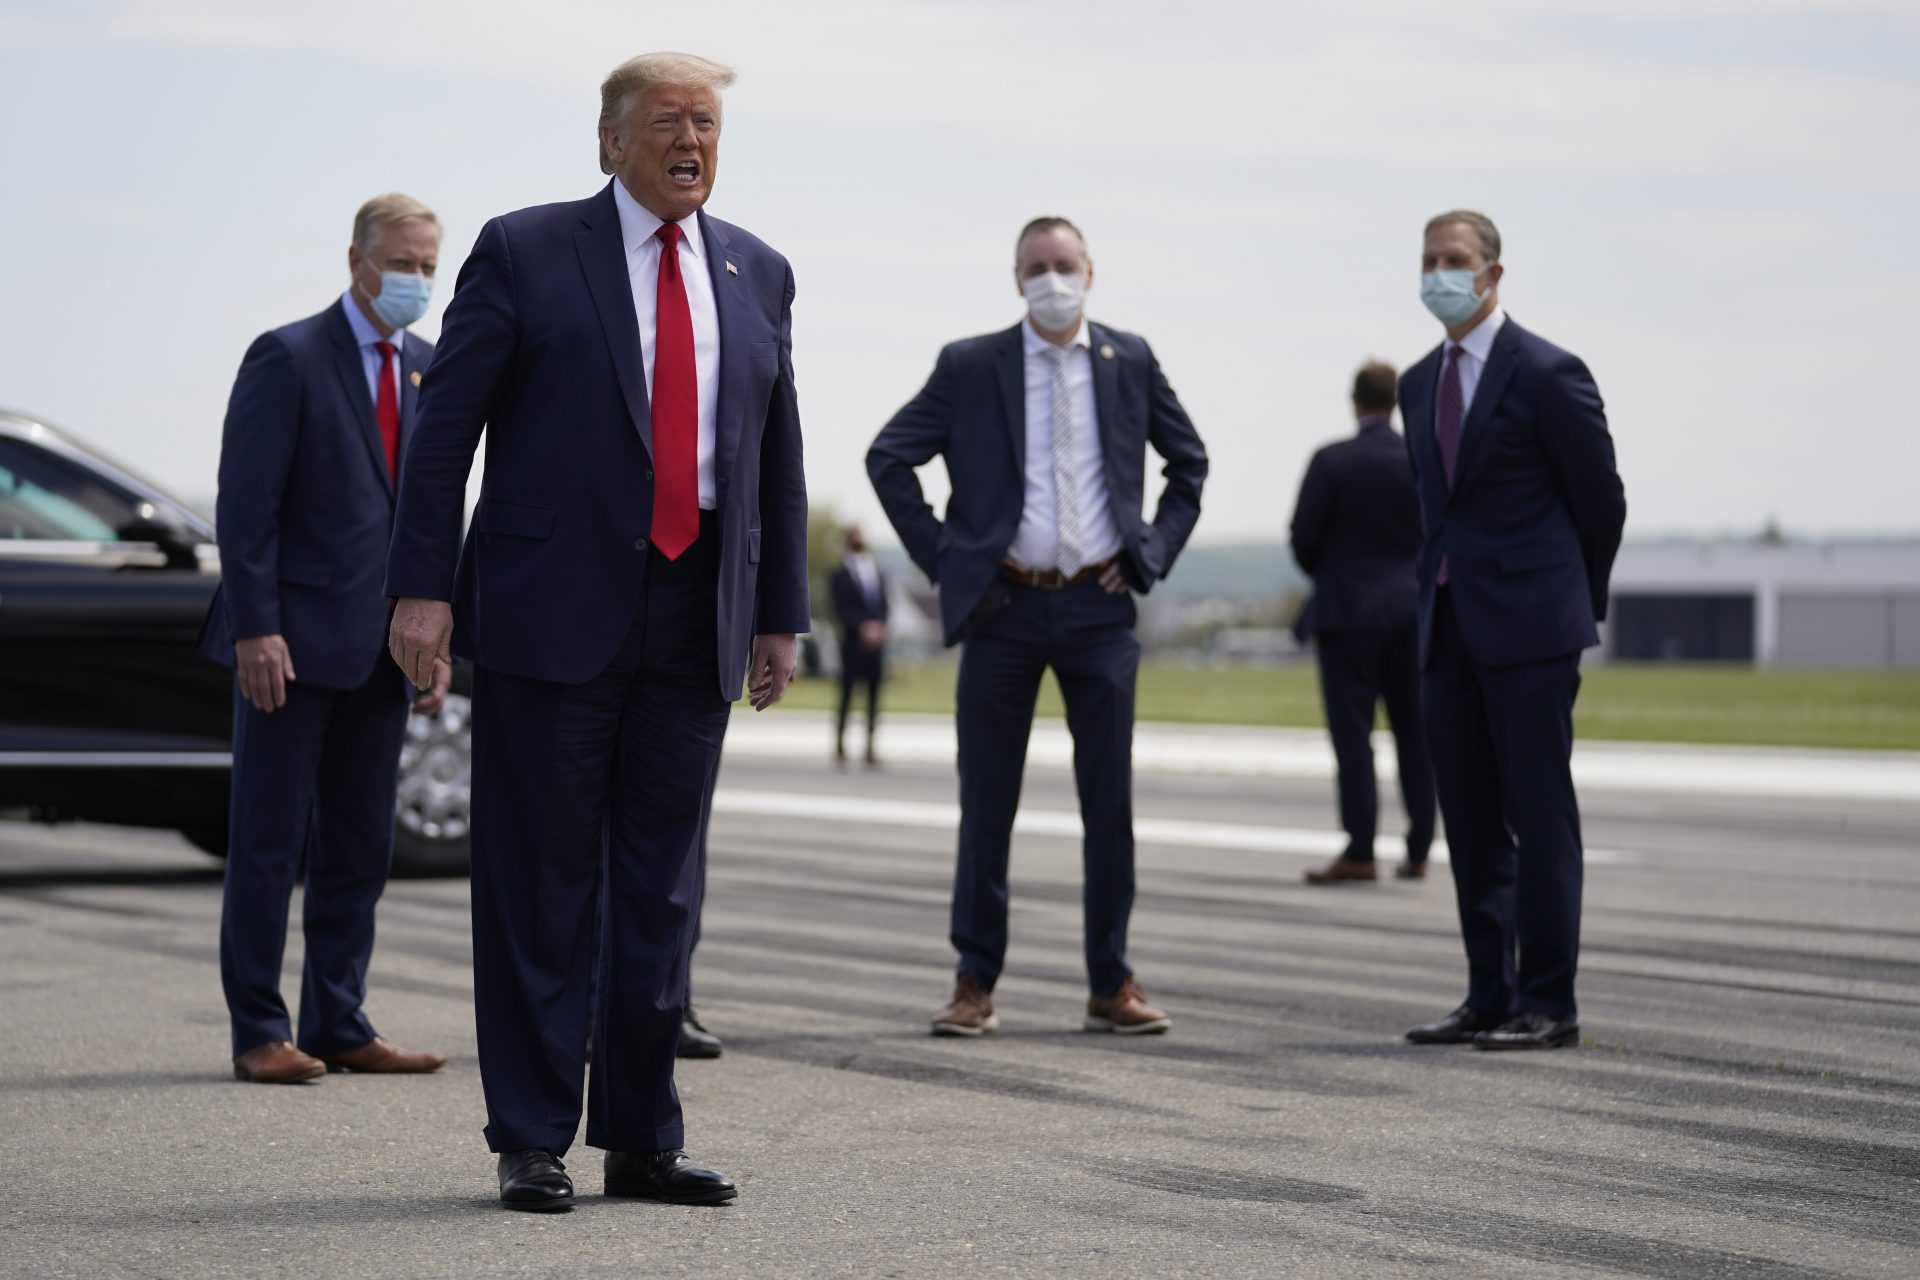 President Donald Trump speaks after exiting Air Force One at Lehigh Valley International Airport in Allentown, Pa., Thursday, May 14, 2020.